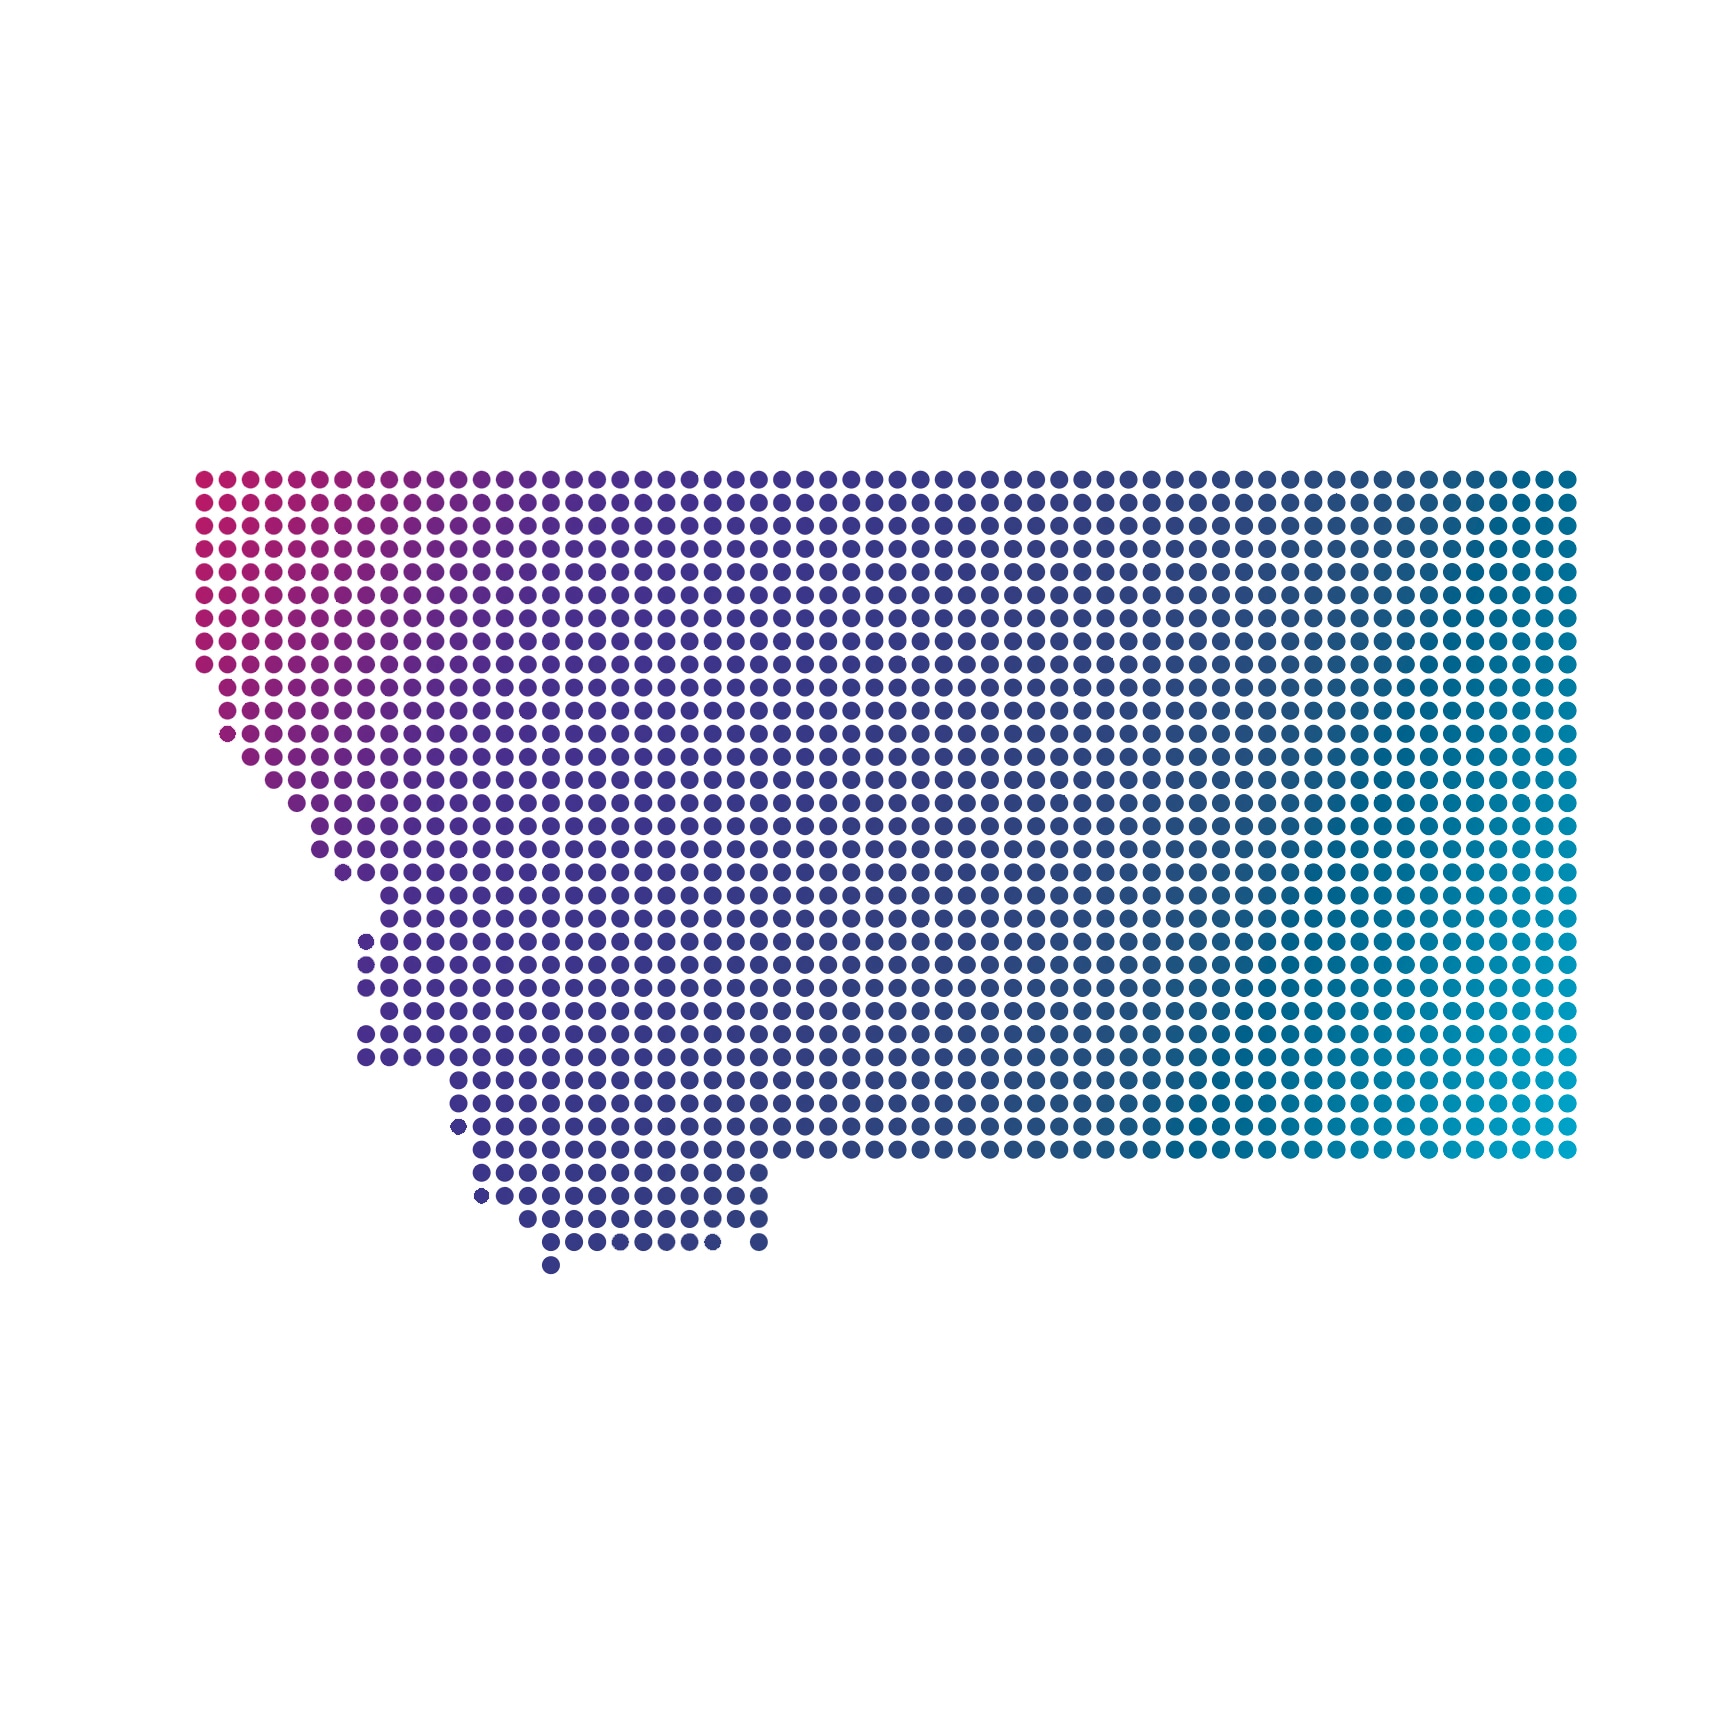 Montana map of blue dots on white background